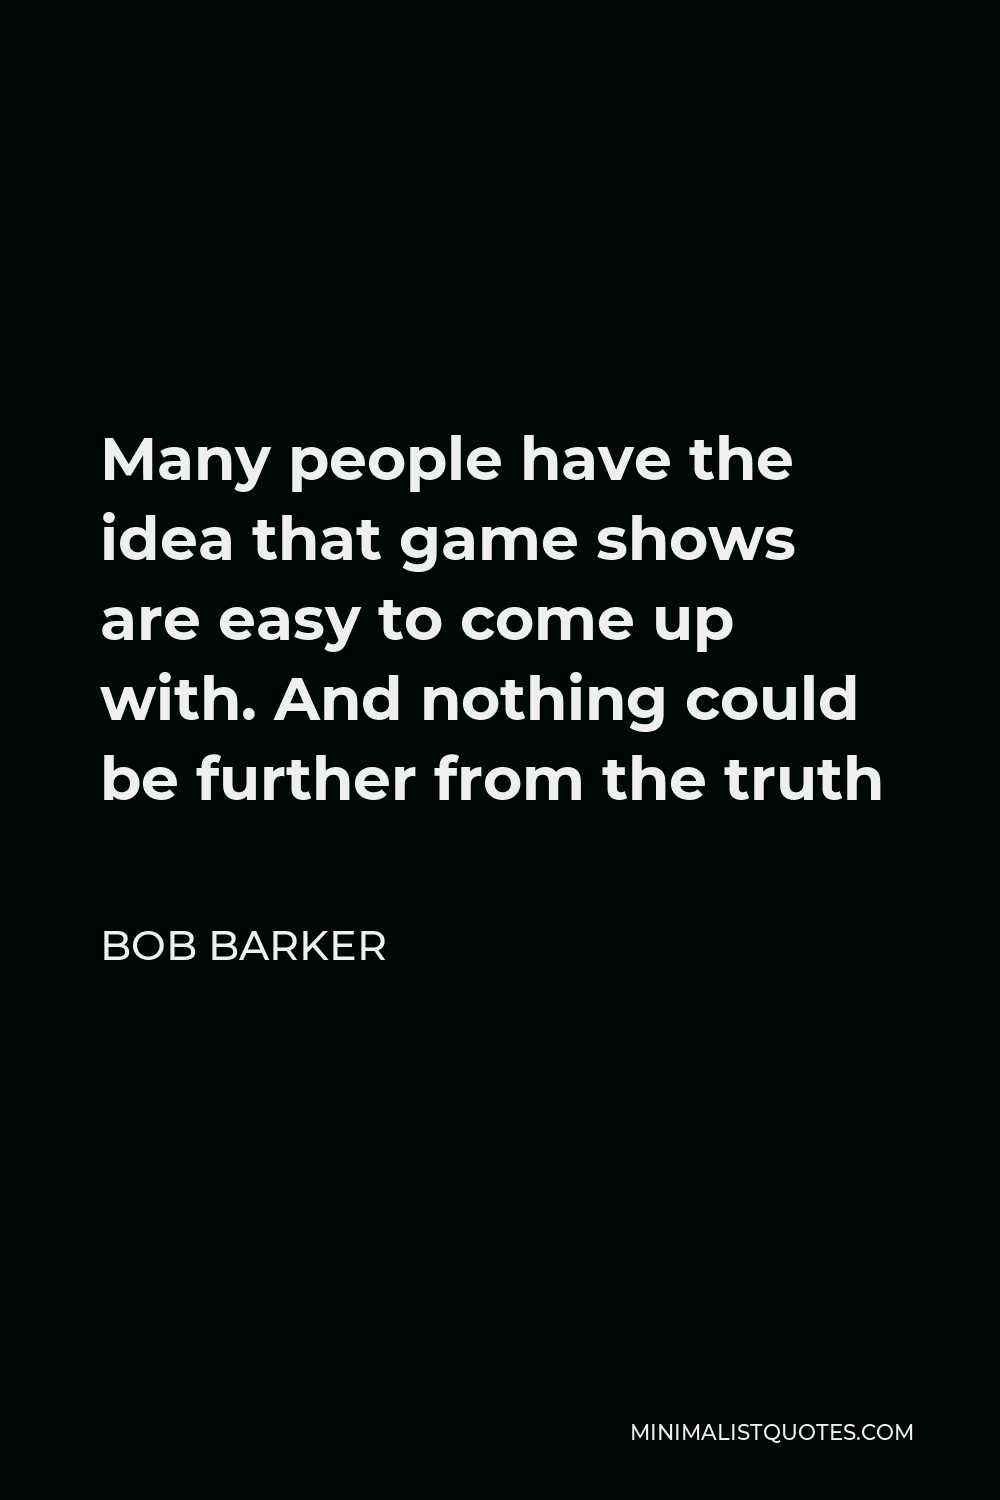 Bob Barker Quote - Many people have the idea that game shows are easy to come up with. And nothing could be further from the truth